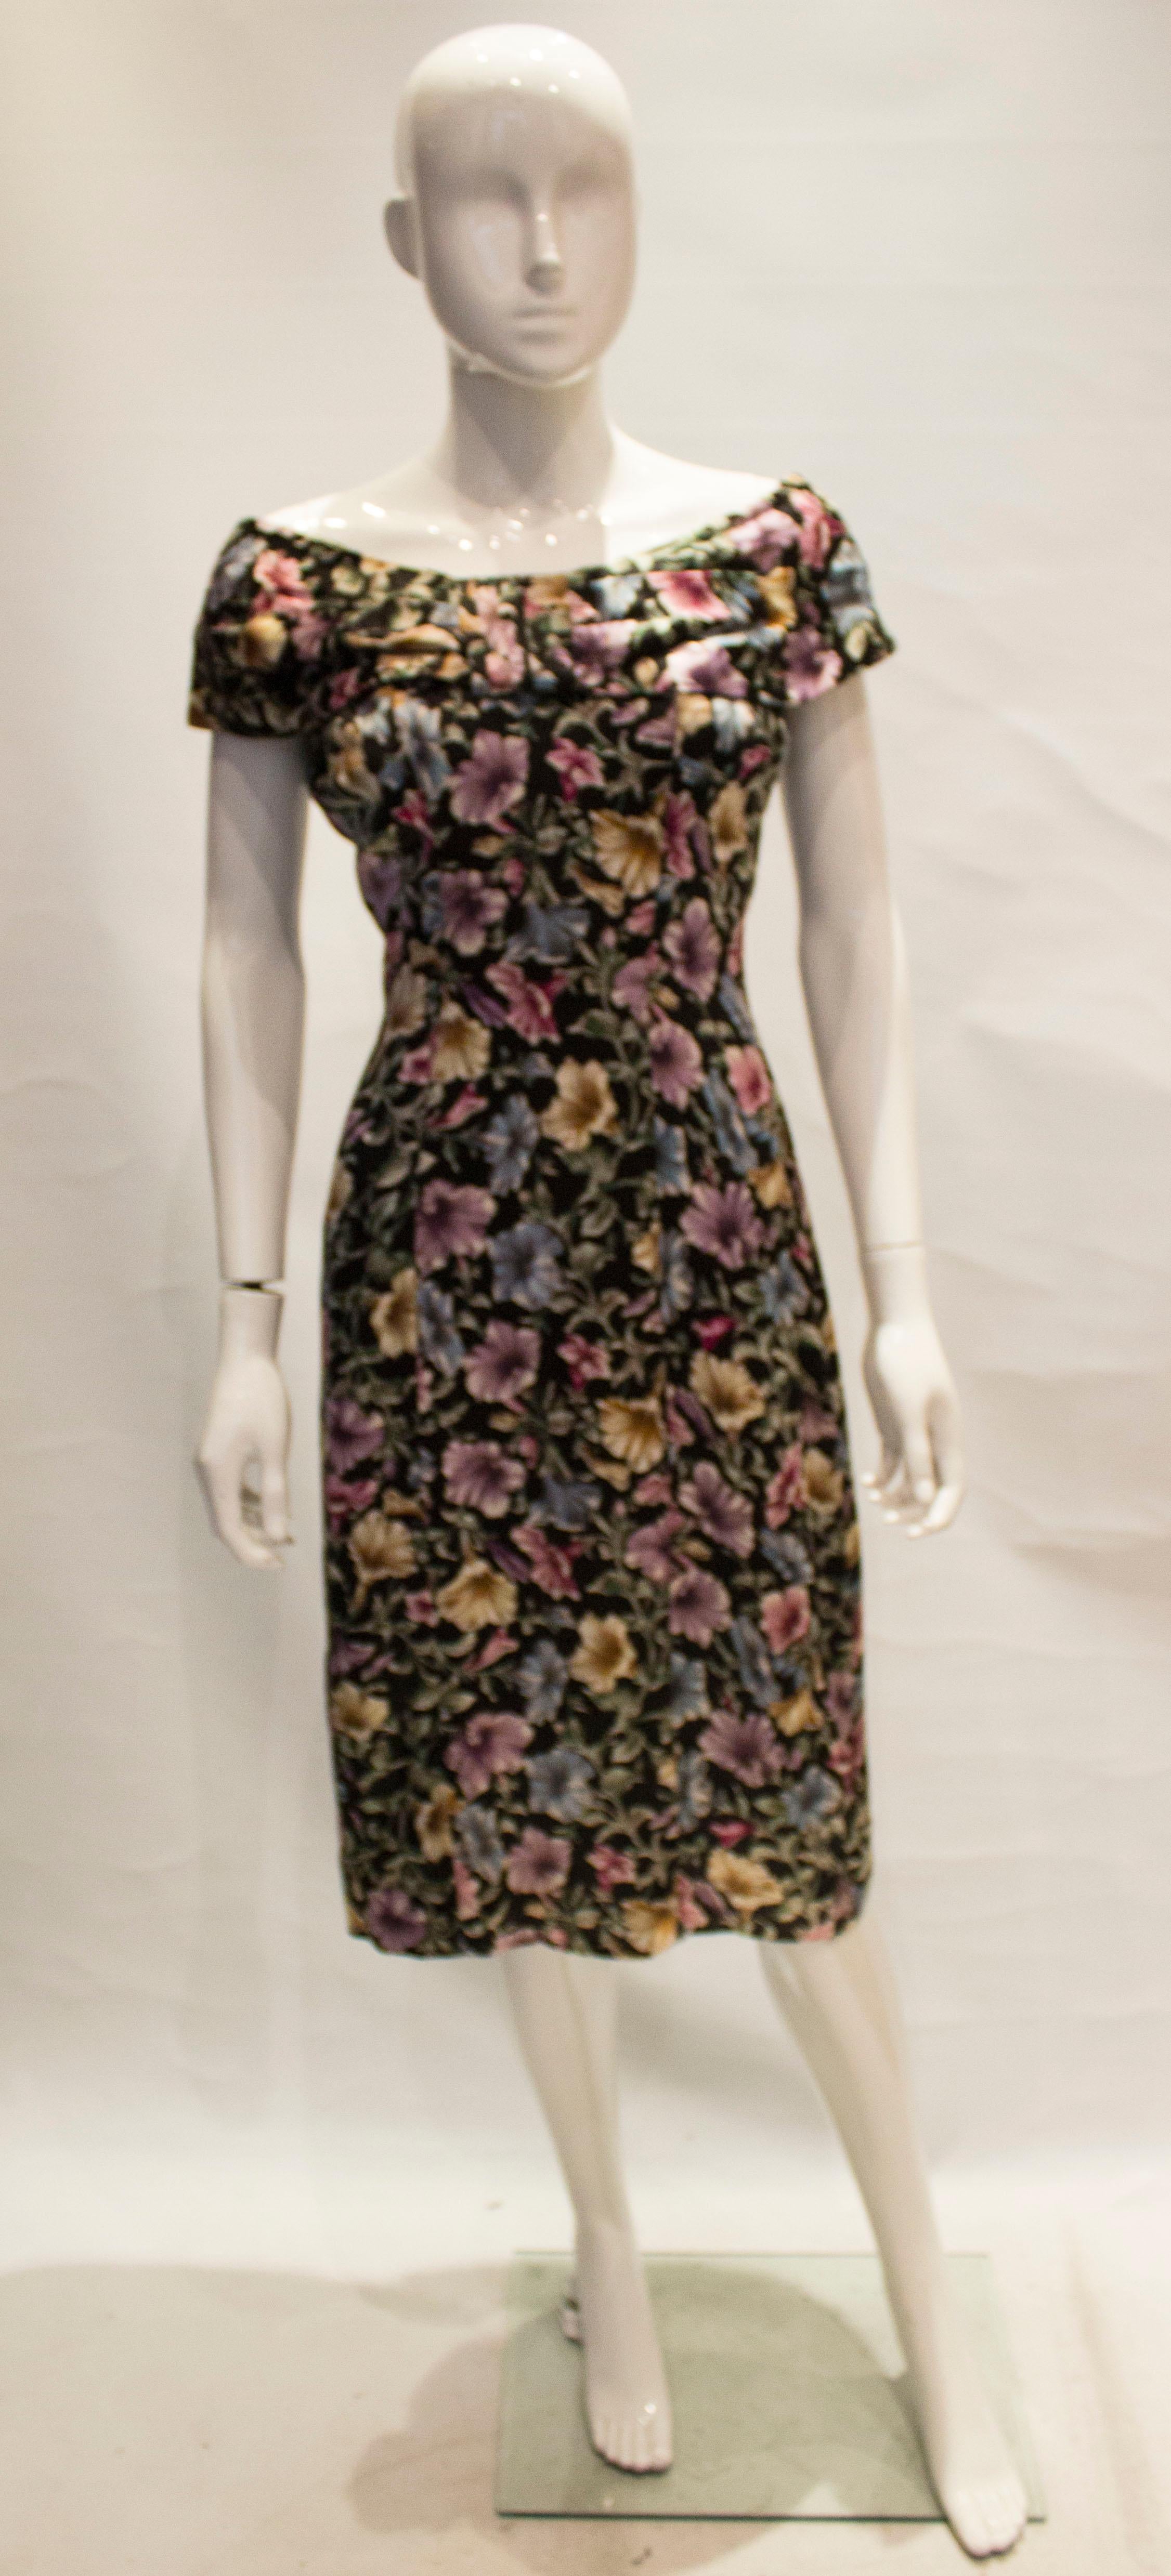  A pretty vintage cocktail dress by Tremara. The dress is off the shoulder with pleats around the neckline.The fabric has a black background with multicolour floral print. The dress has a 7 1/2 slit at the back and 2 1/2'' hem.